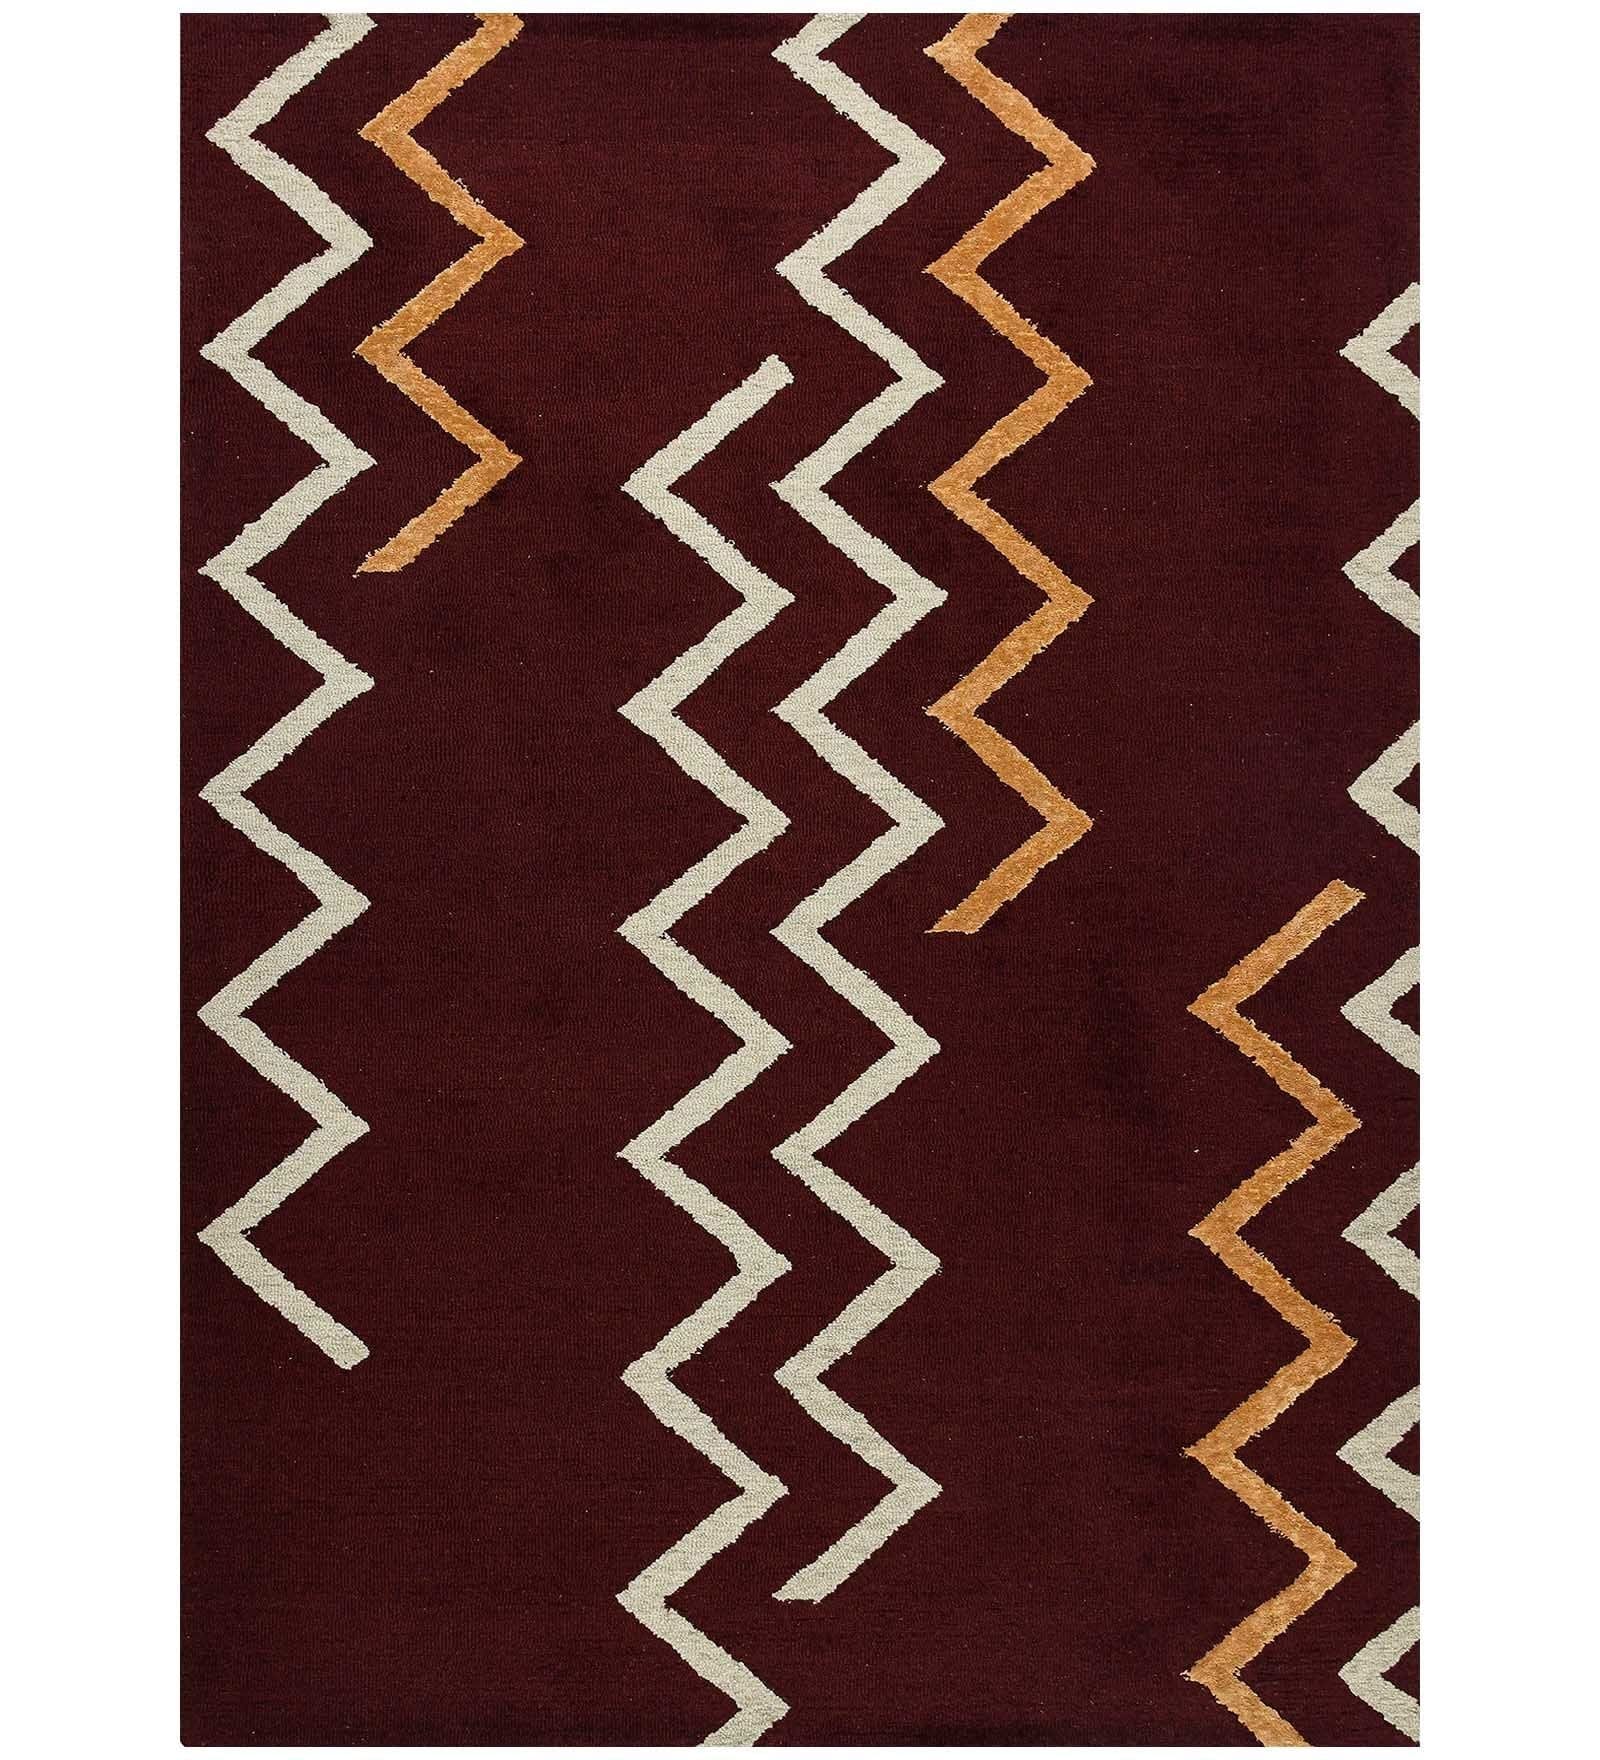 RED BERRY Wool & Viscose Canyan 4x6 Feet  Hand-Tufted Carpet - Rug